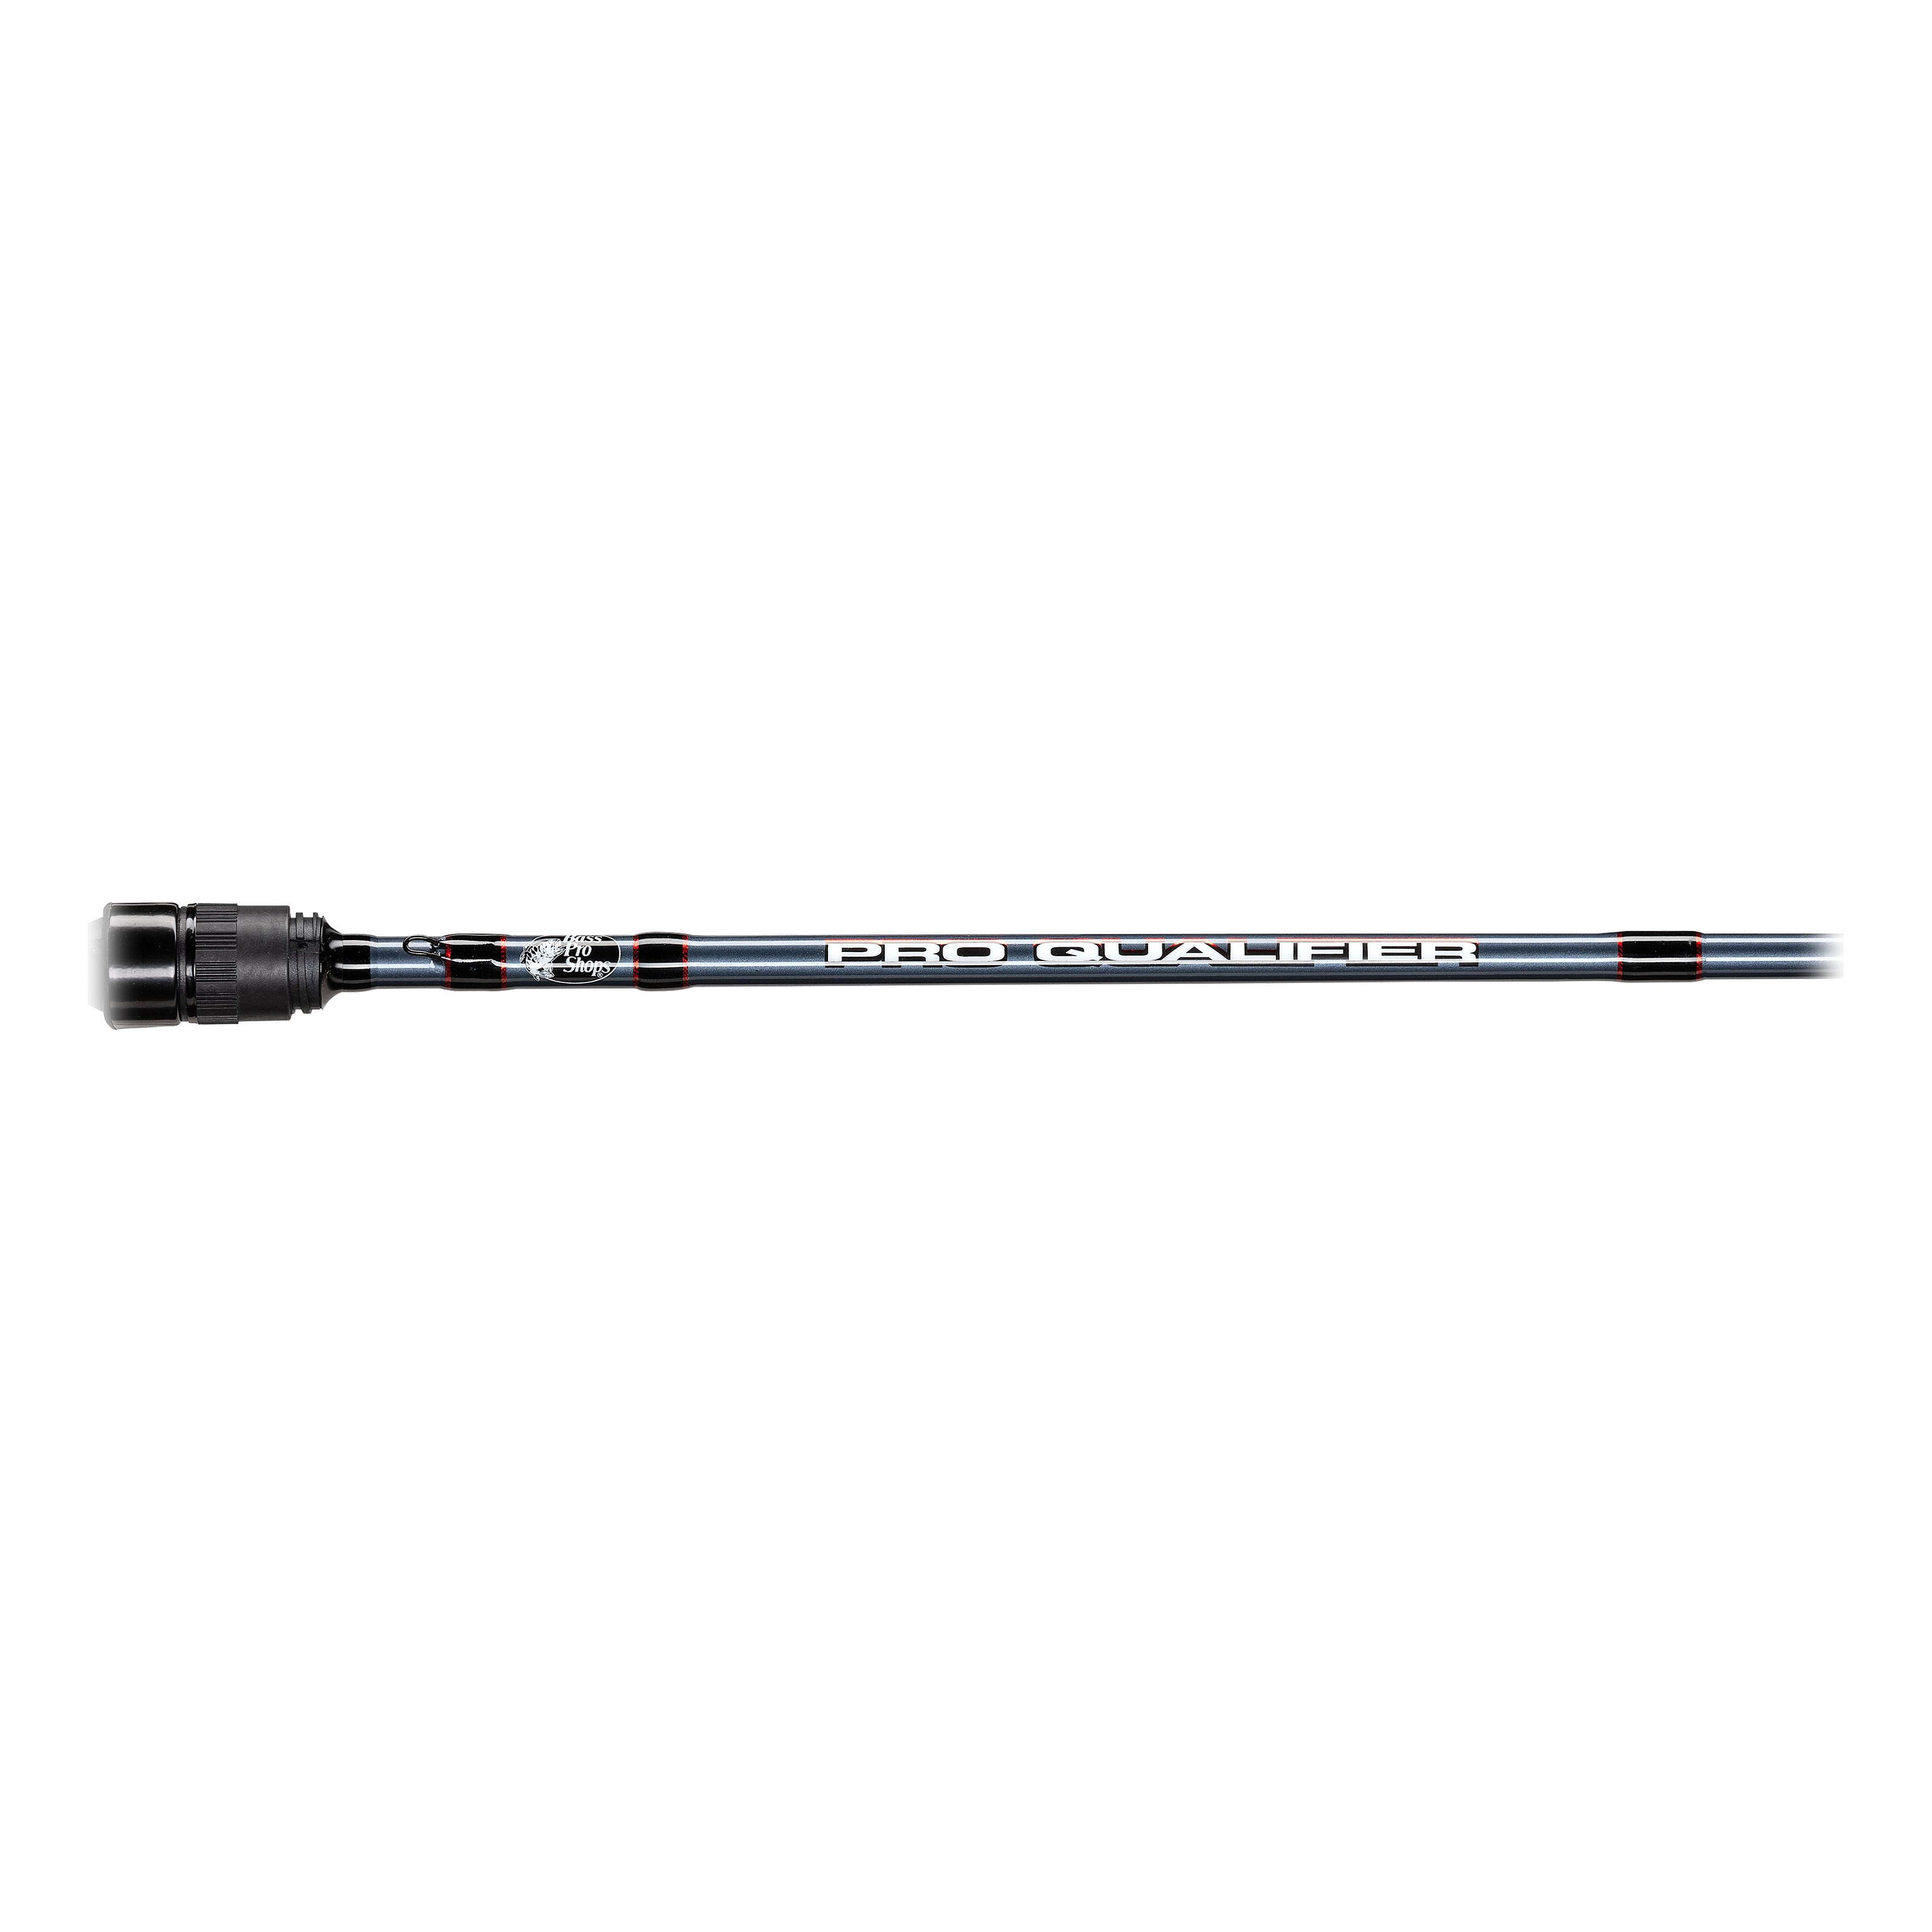 Bass Pro Shops® Pro Qualifier® Spinning Rod